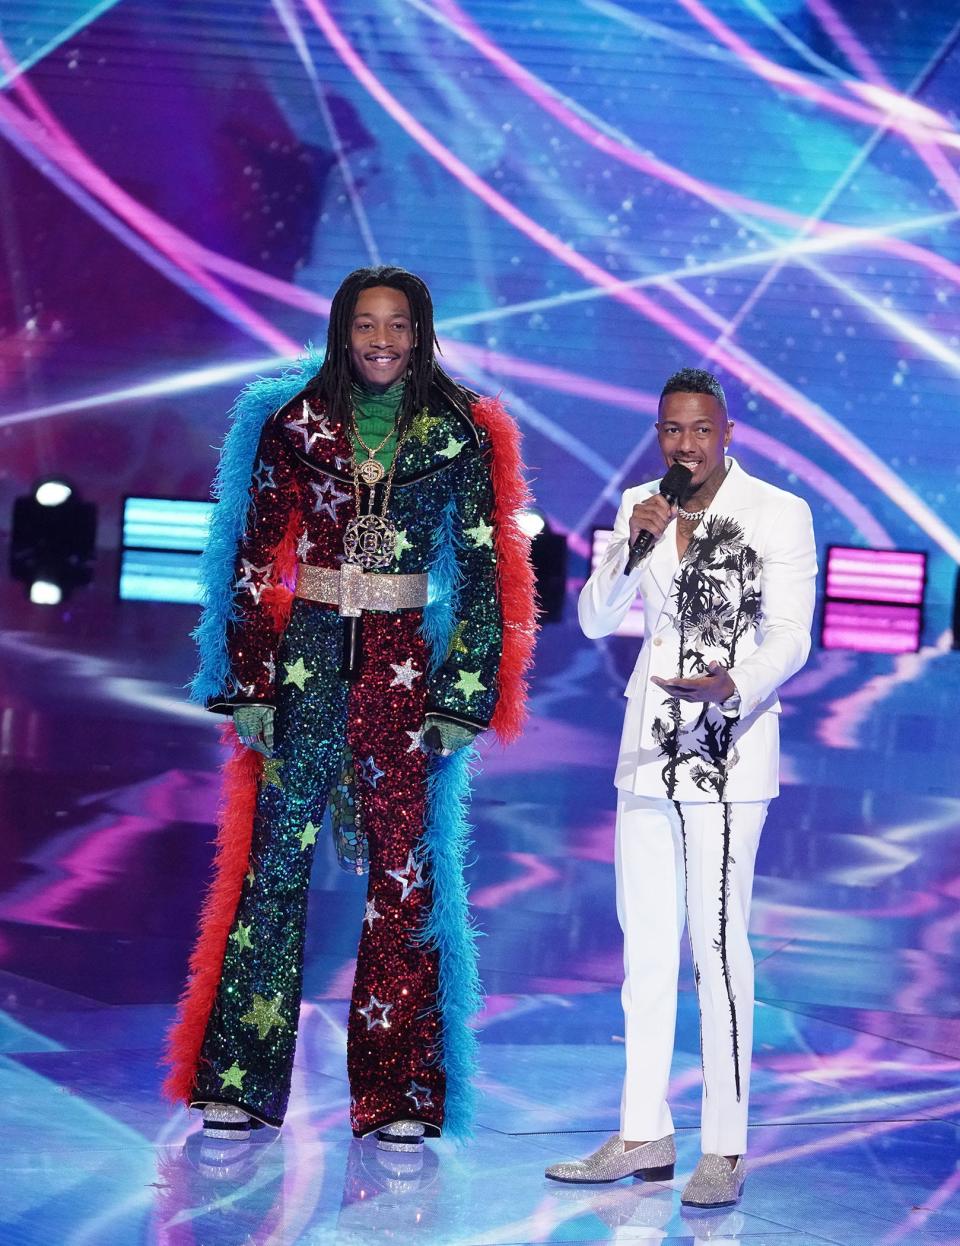 (L-R) Wiz Khalifa and host Nick Cannon in "The Masked Singer" finale.